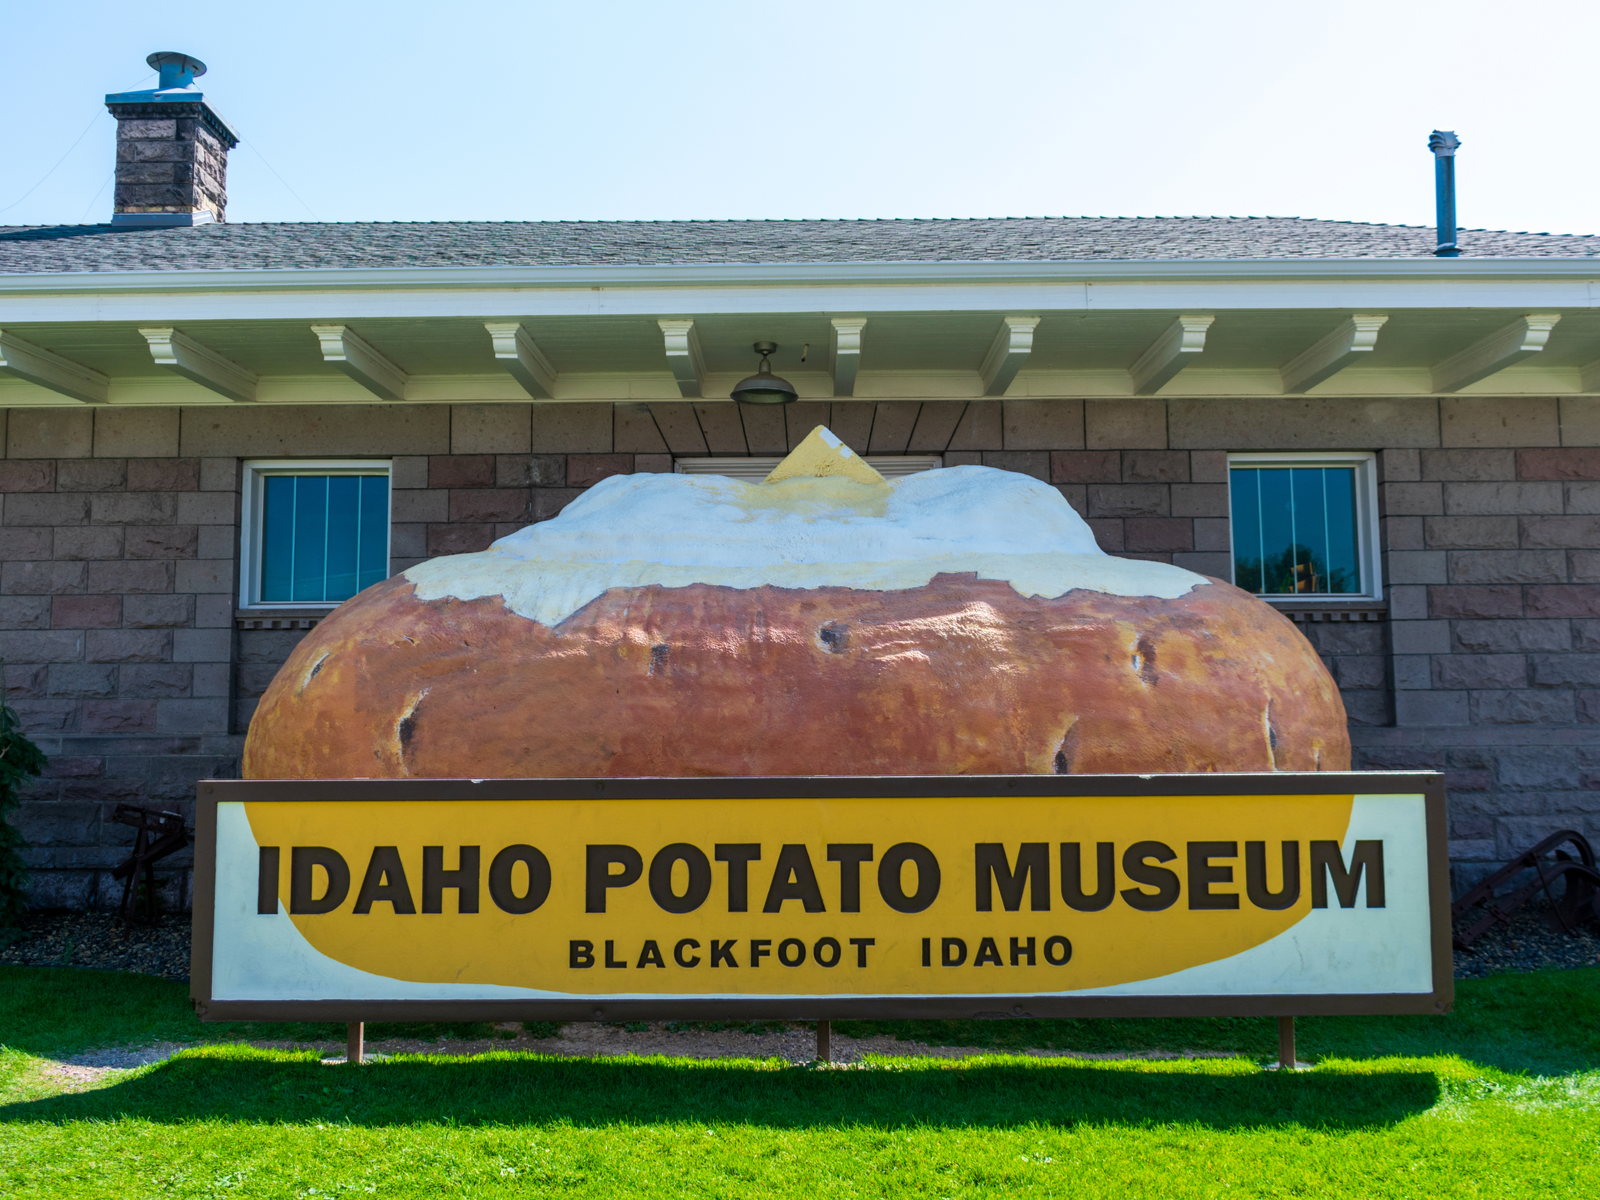 A gigantic baked potato statue and a signage of Idaho Potato Museum, one of the best things to see in Idaho, erected to preserve the potato history and industry